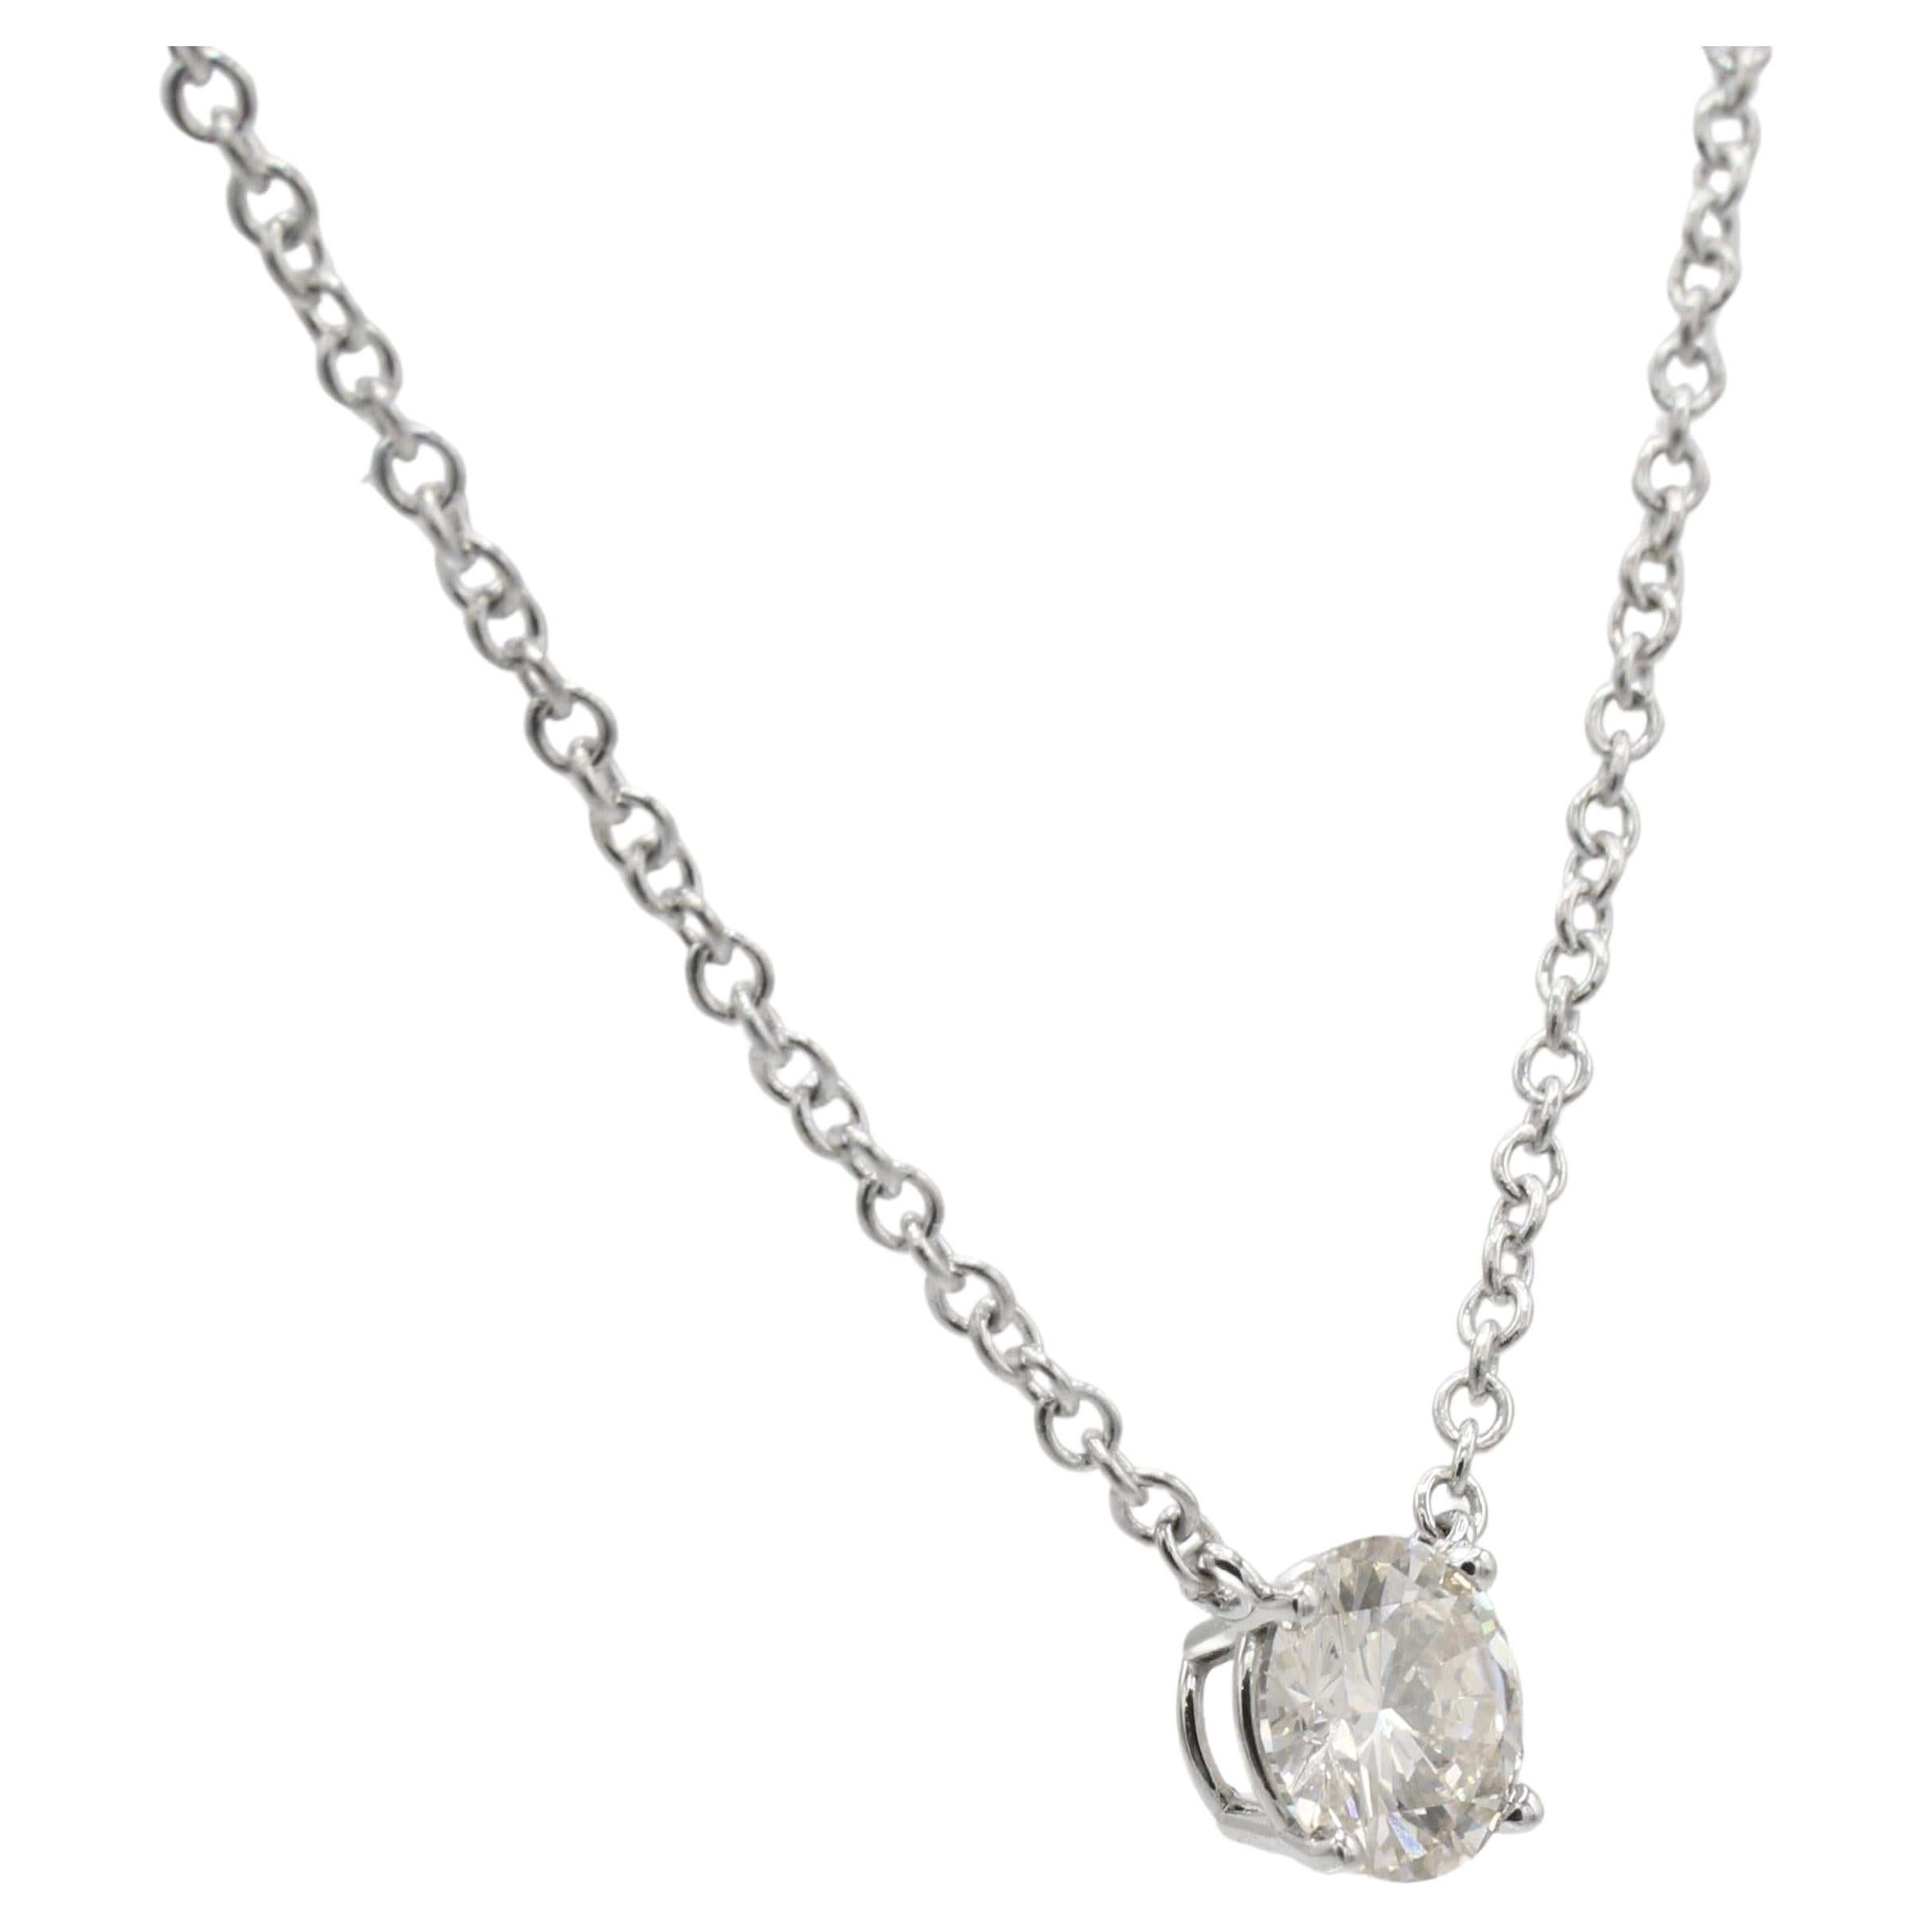 14 Karat White Gold 1.02 Carat Round Natural Diamond Drop Necklace
Metal: 14k white gold
Weight: 2.79 grams
Chain: 16 inches
Clasp: Lobster
Diamond: 1.02 round I SI1 natural diamond, 6.5mm

